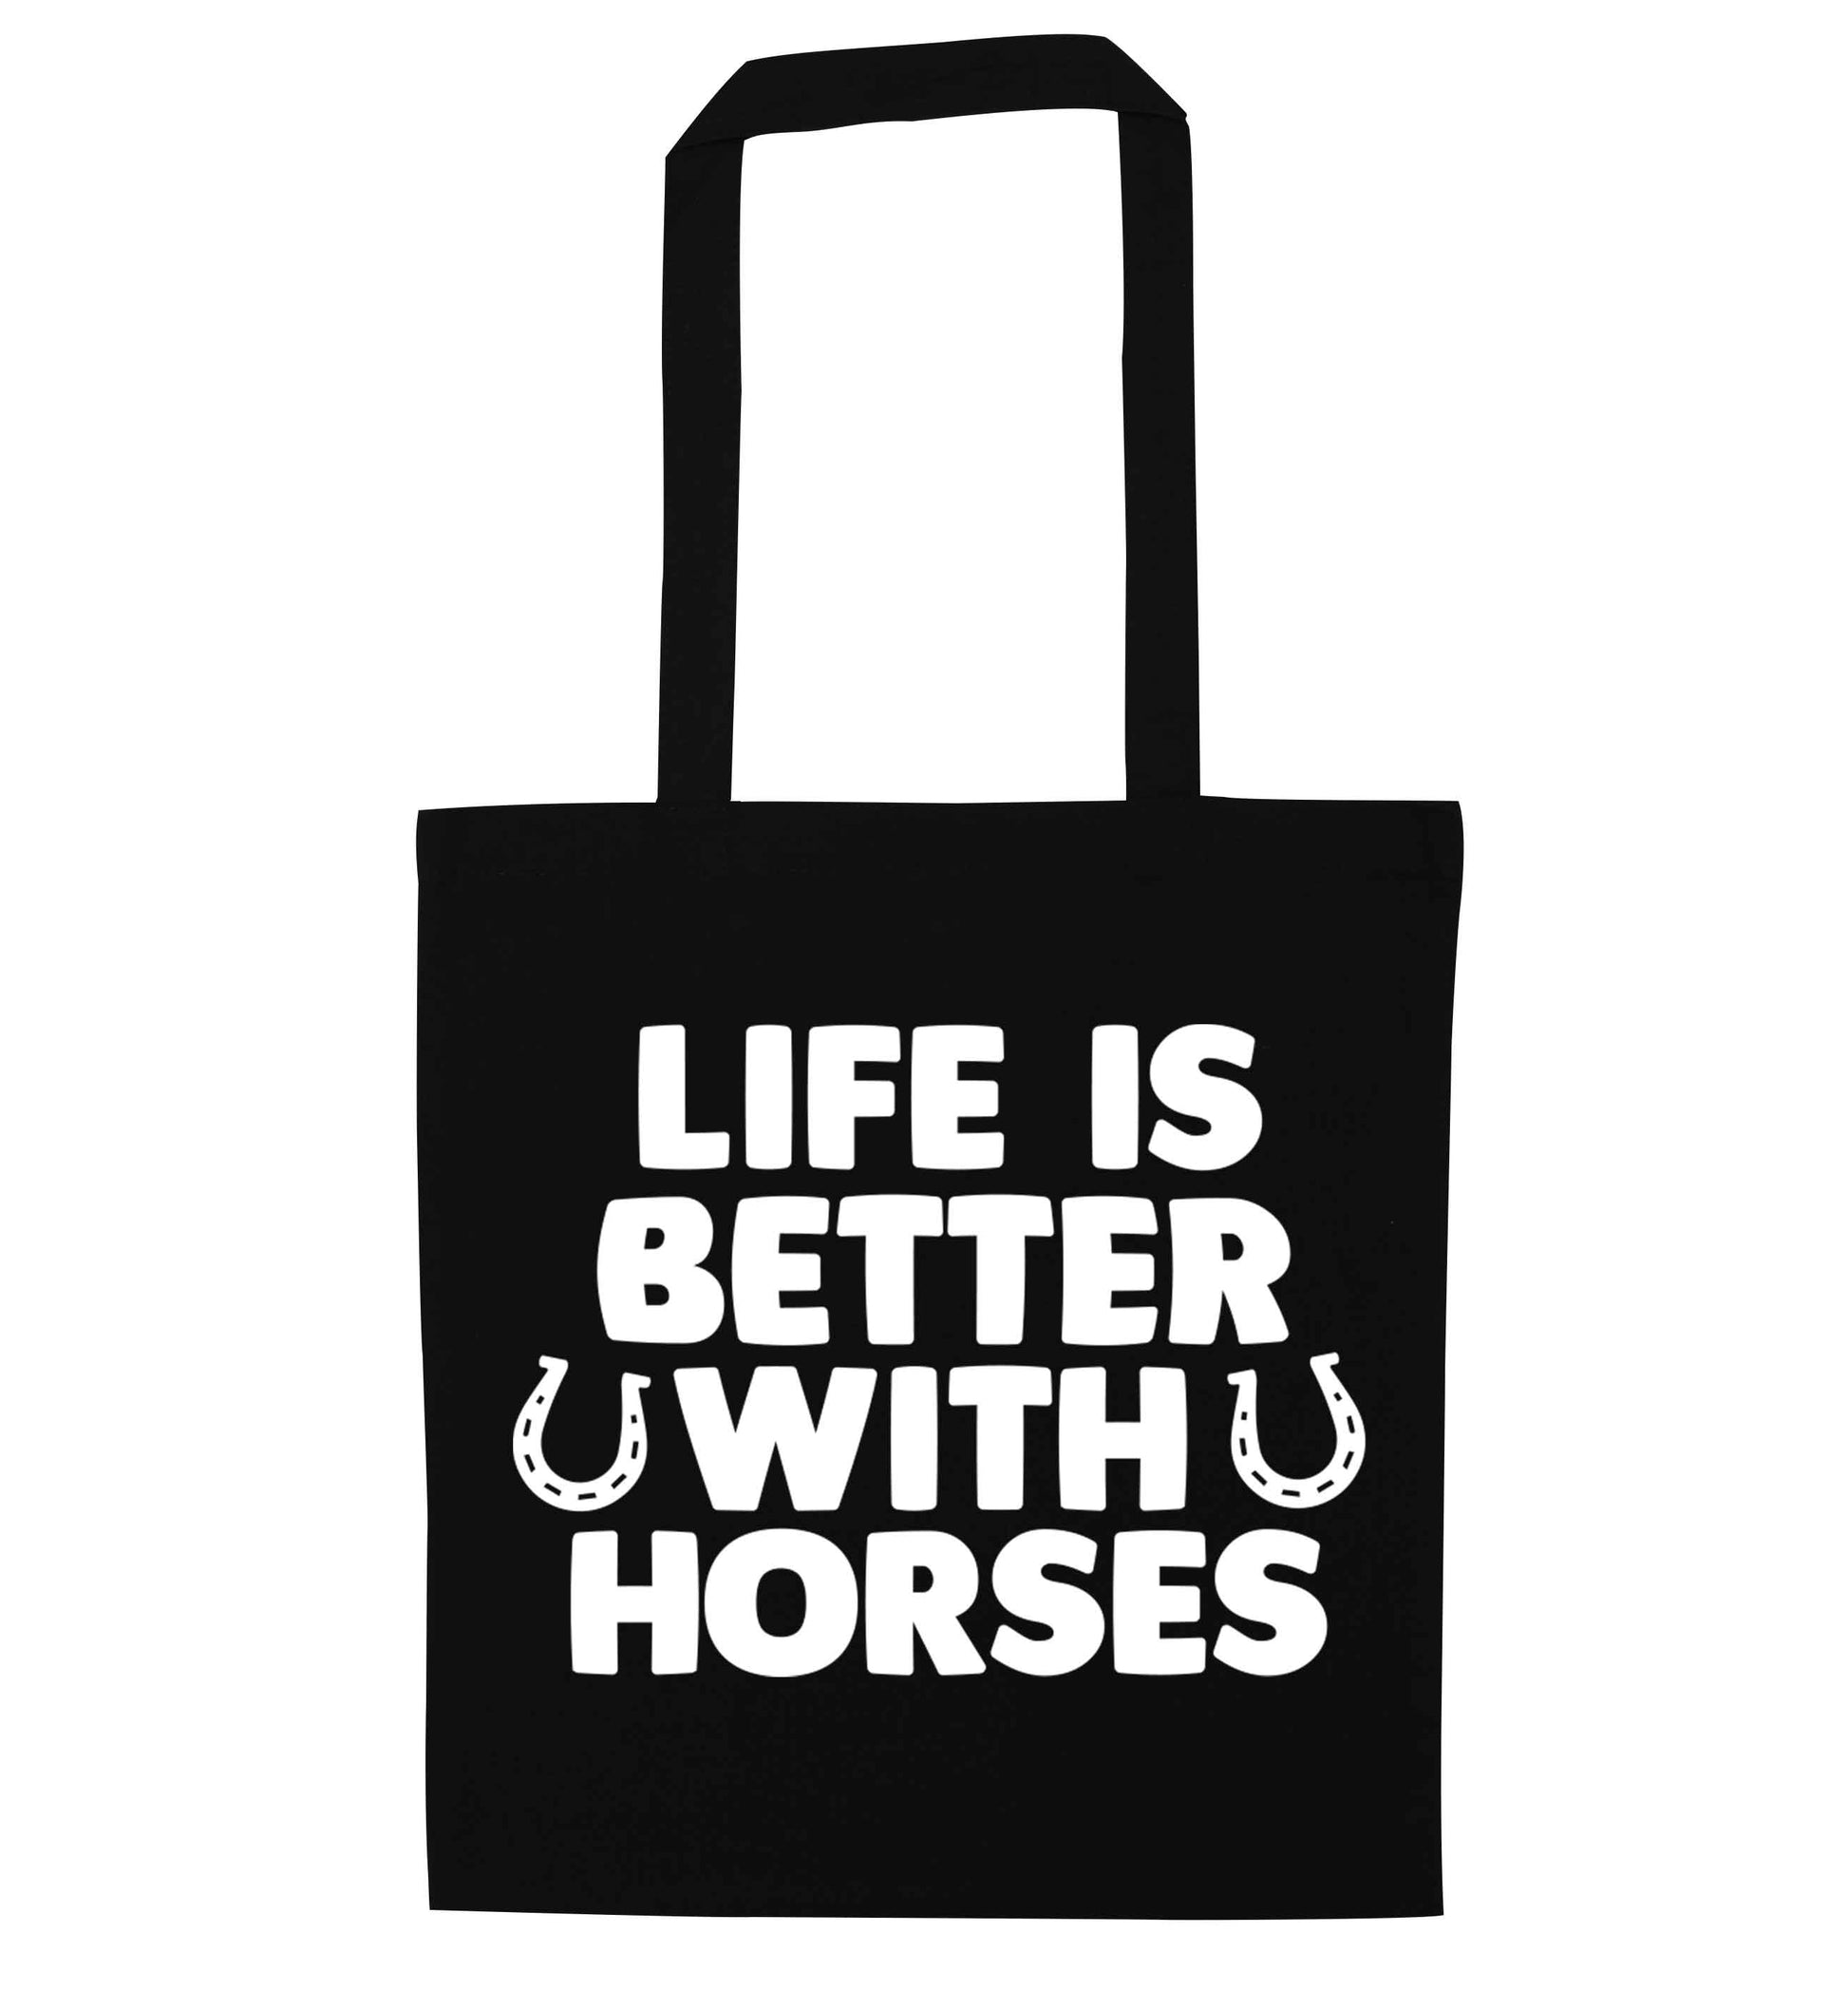 Life is better with horses black tote bag